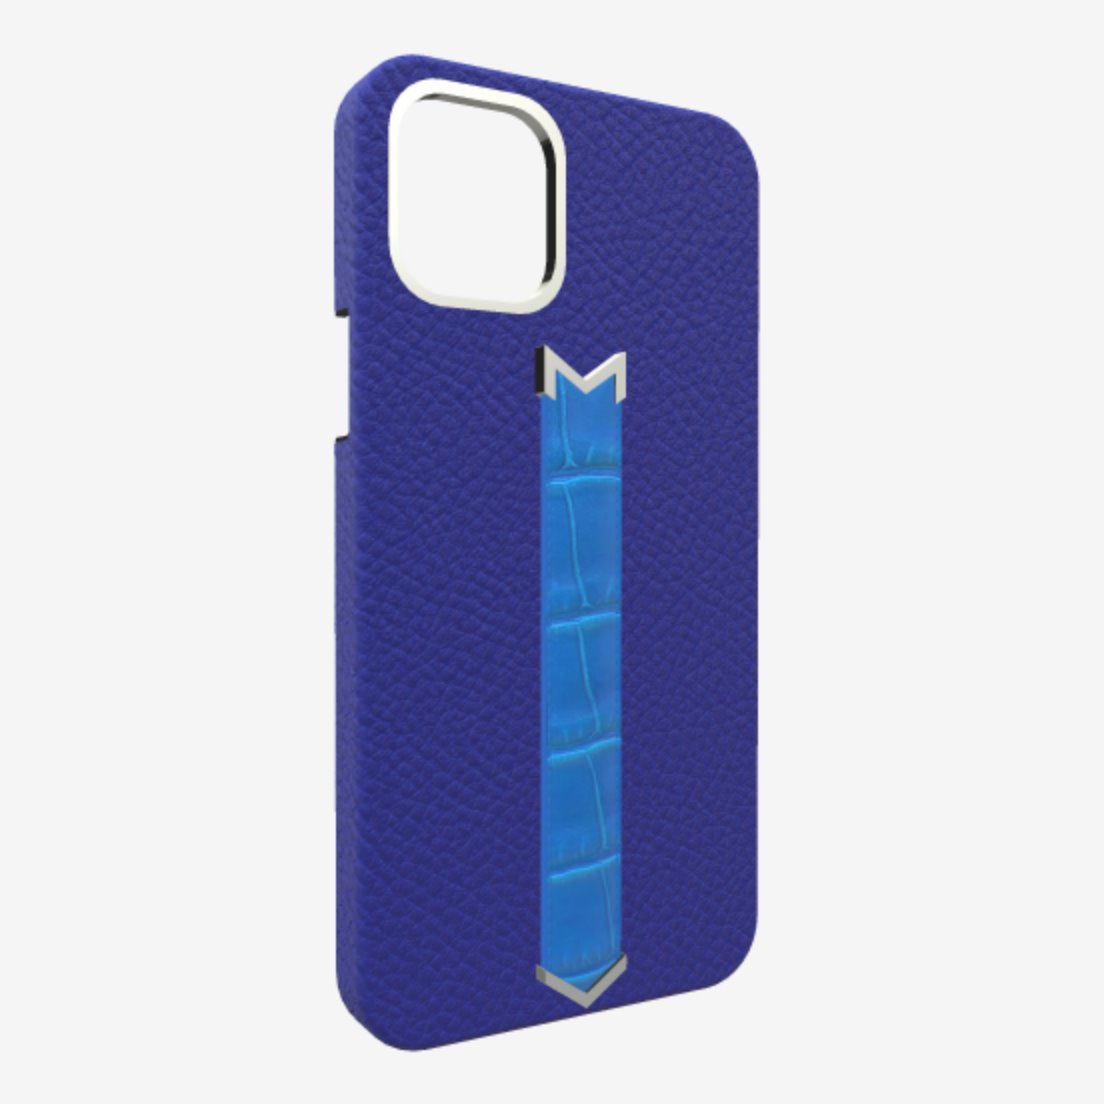 Silver Finger Strap Case for iPhone 13 in Genuine Calfskin and Alligator Electric-Blue Royal-Blue 